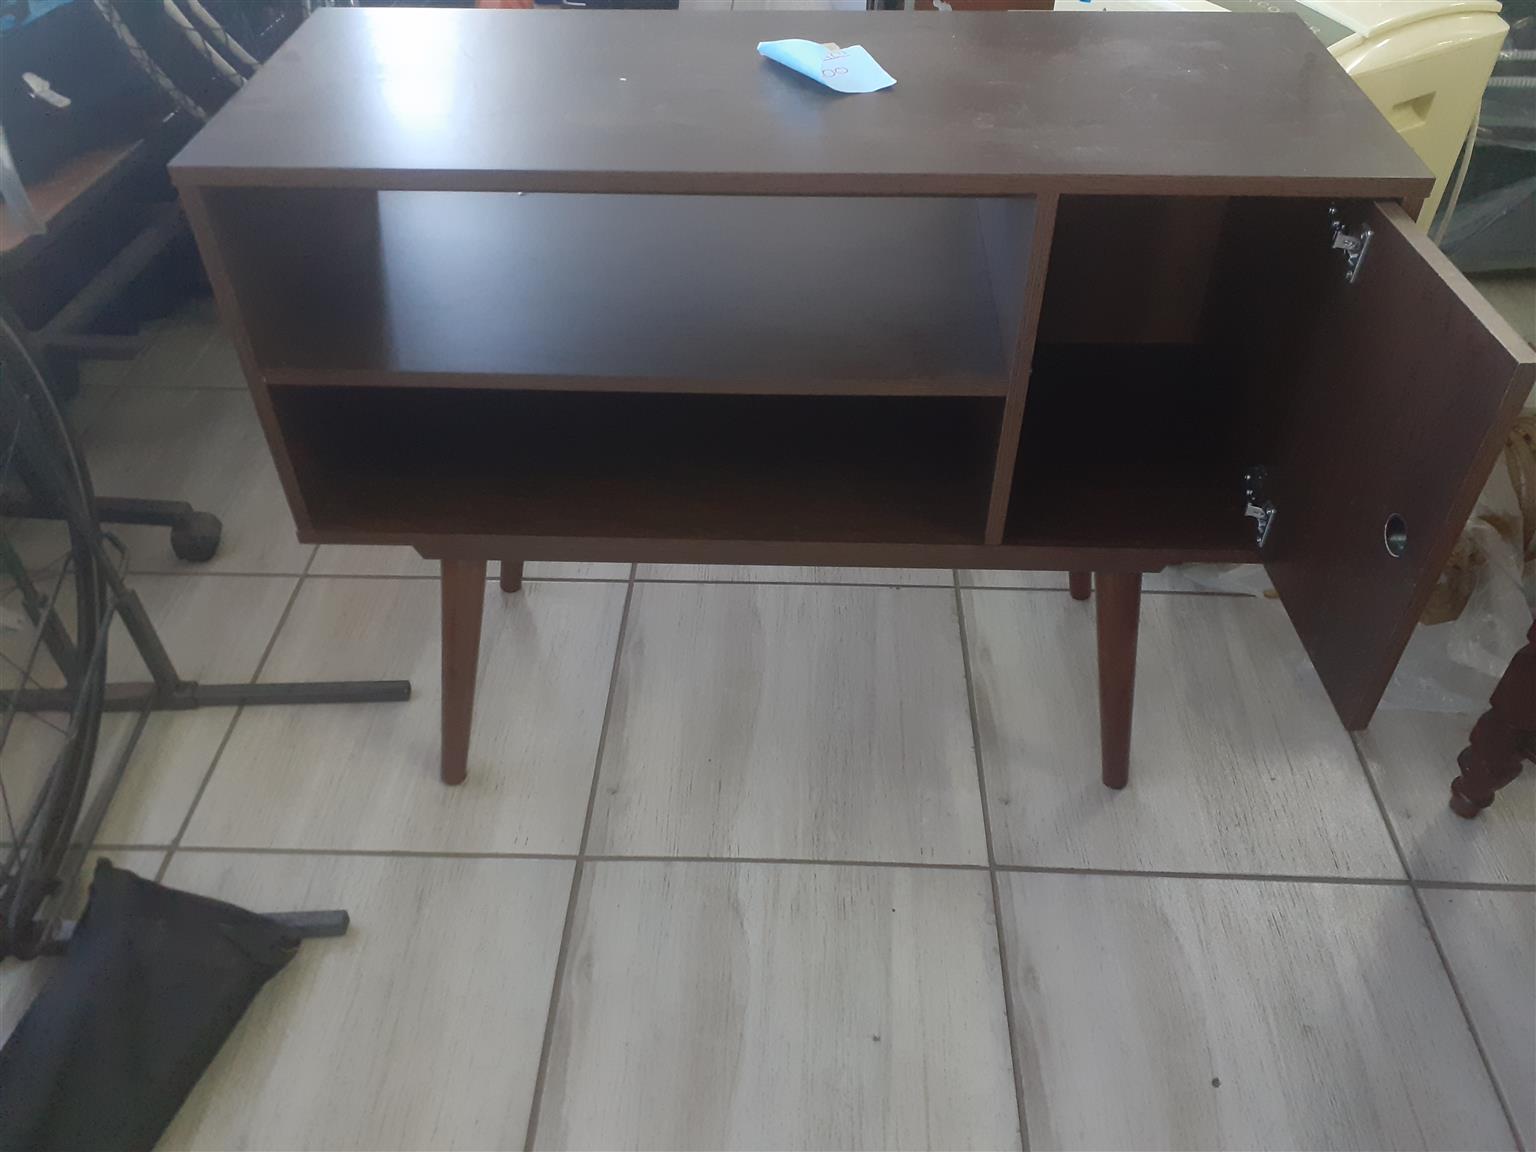 TV Stand (S107317A)